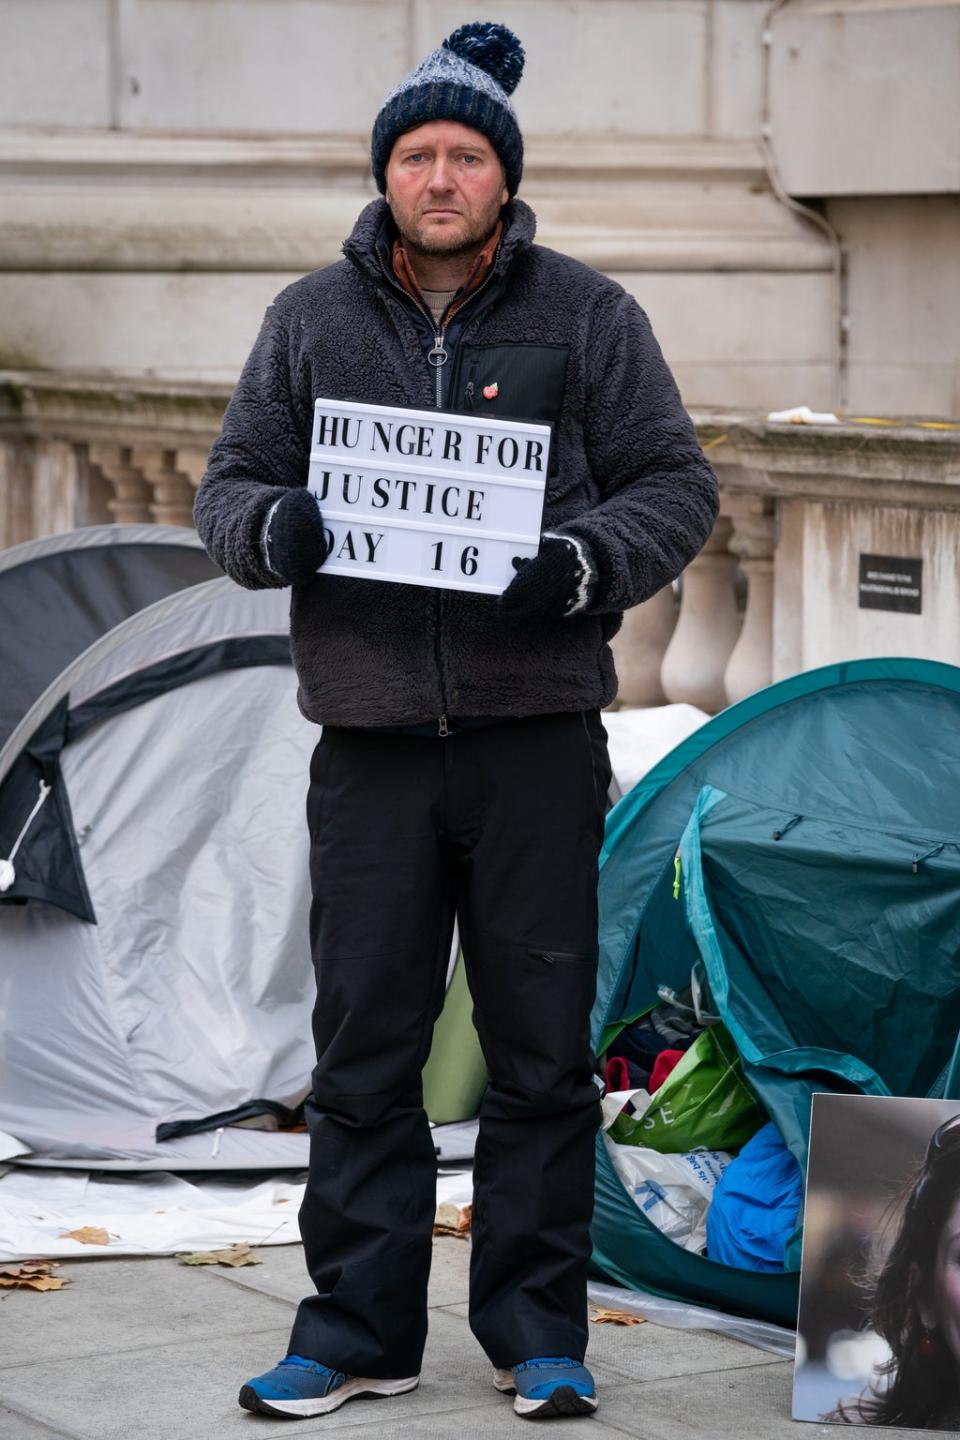 Mr Ratcliffe is on day 16 of his hunger strike (Aaron Chown/PA) (PA Wire)